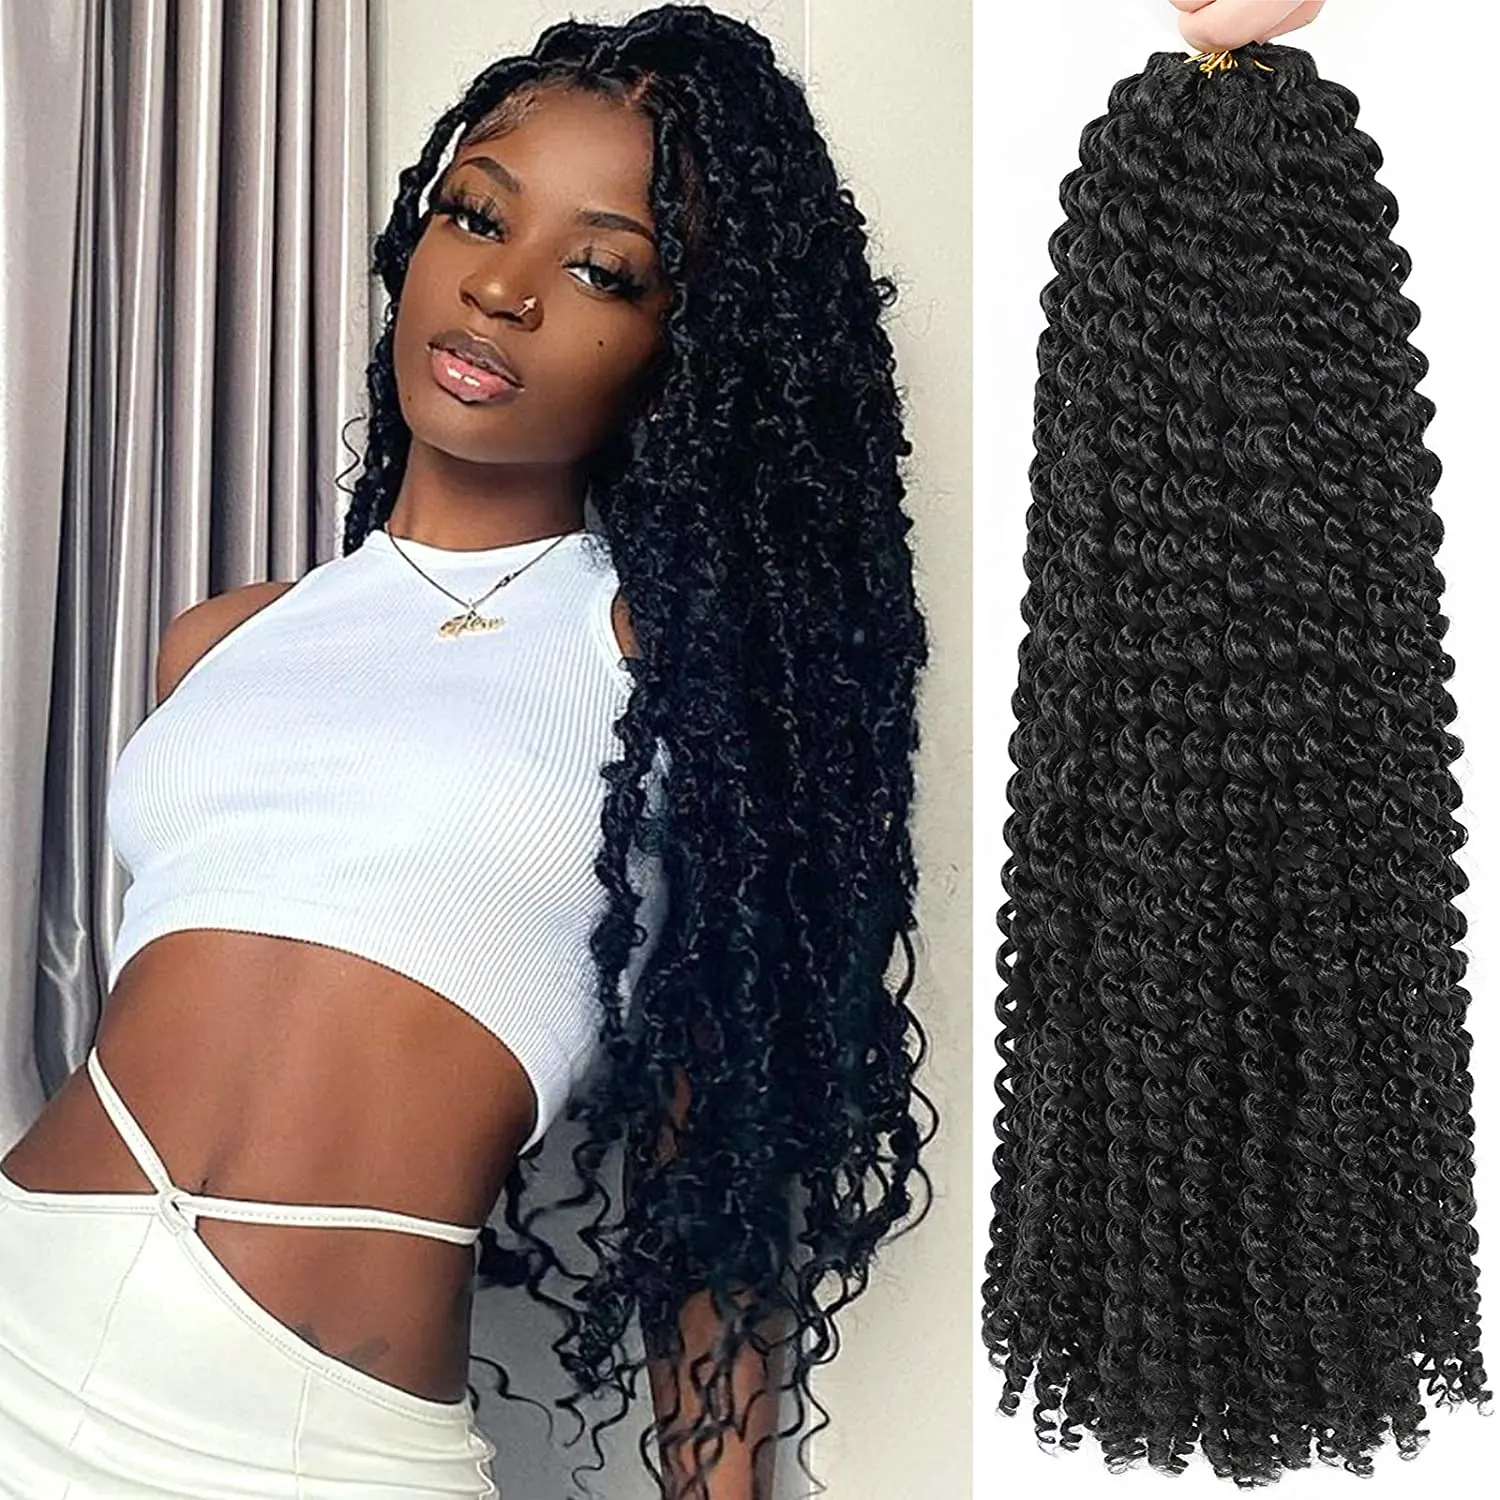 Passion Twist Hair Ombre Blonde Water Wave Braiding Hair for Butterfly Crochet Hair for Women Twist Braiding Hair Extensions